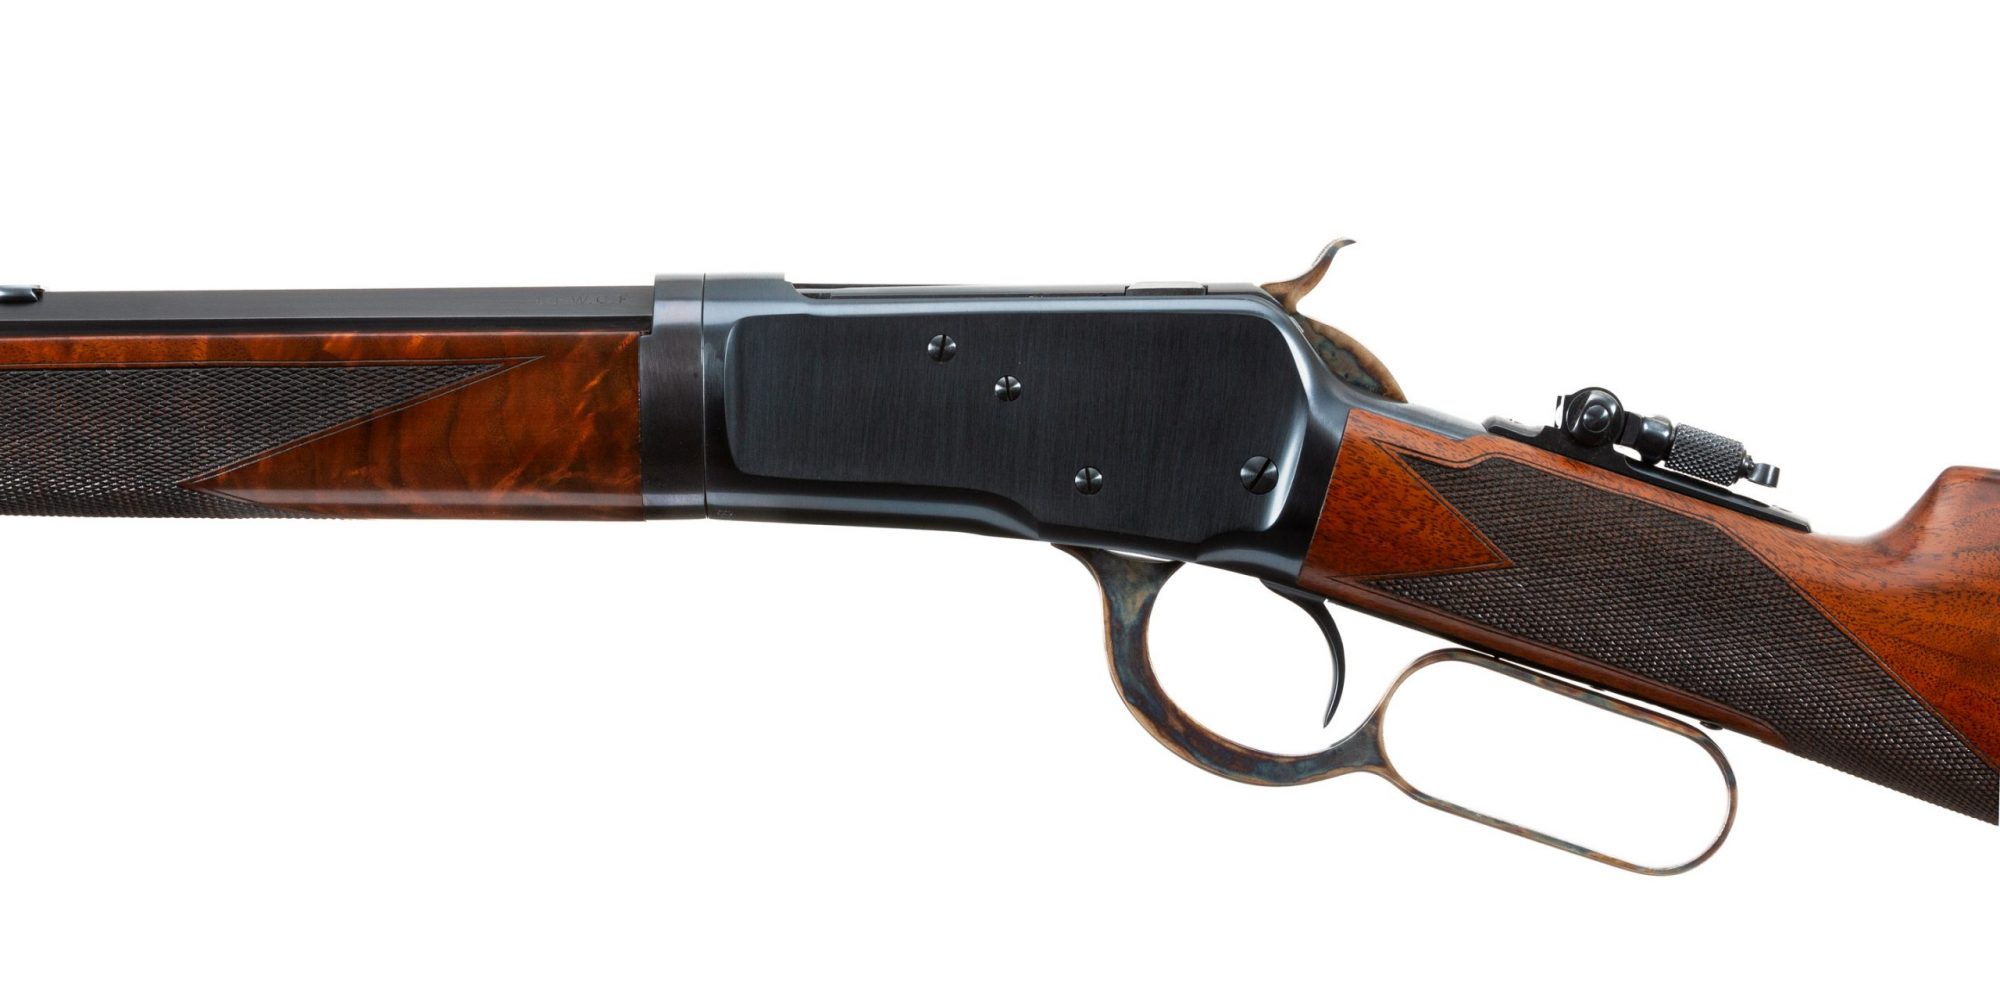 Photo of a pre-owned Winchester Model 1892 Takedown, previously restored by Turnbull Restoration and now up for sale